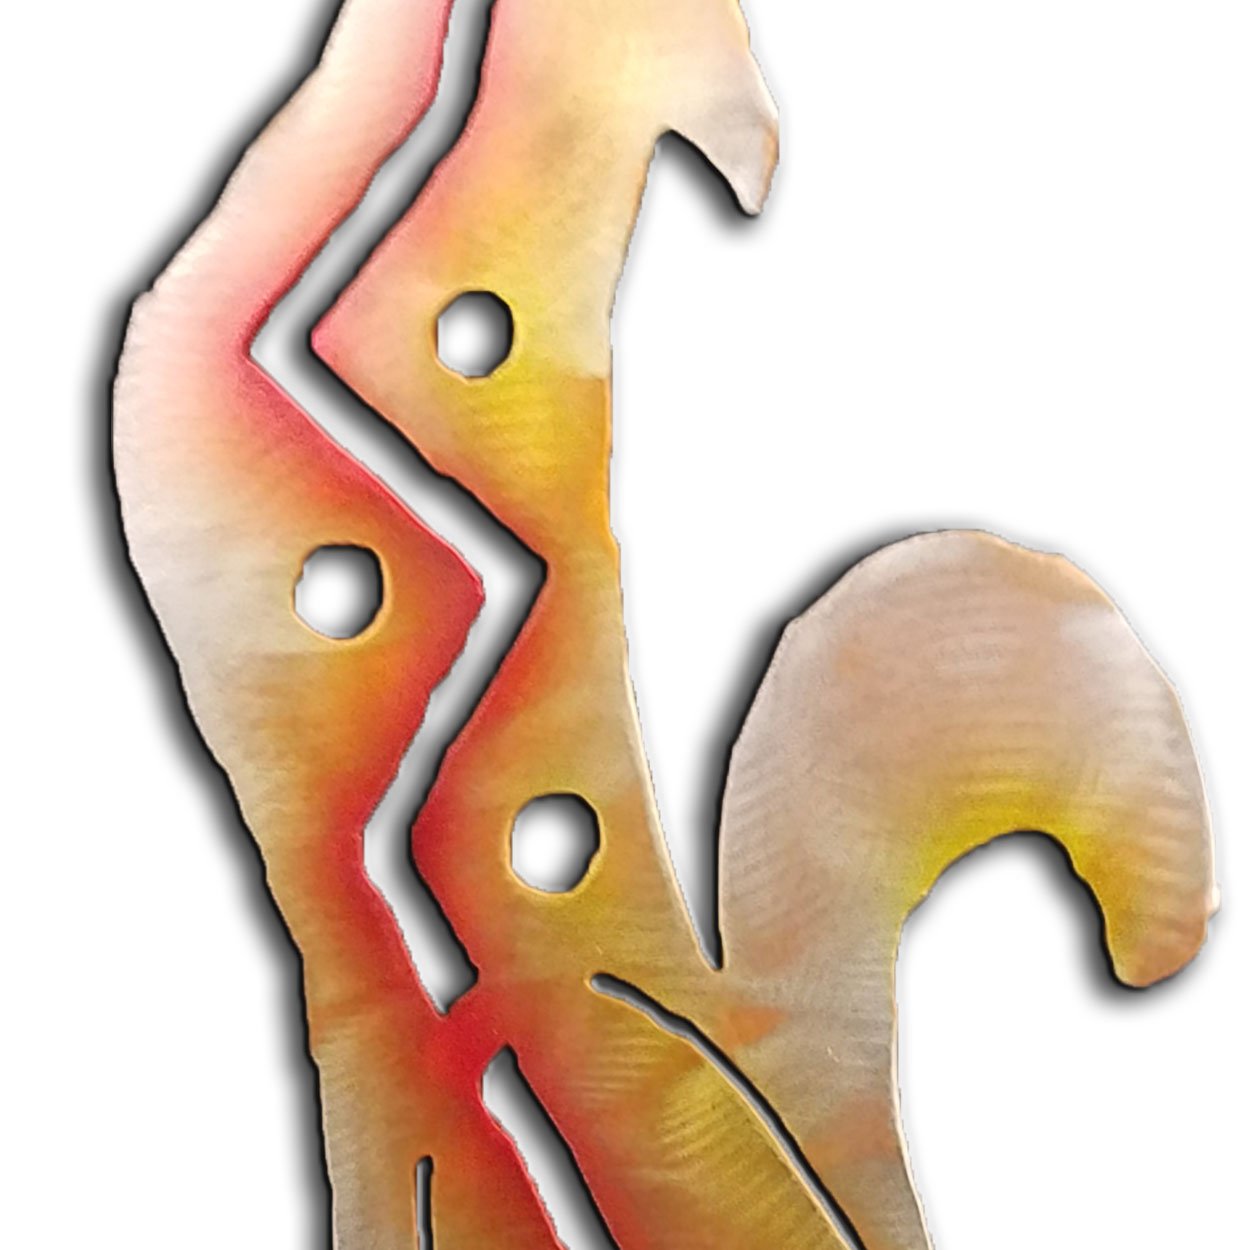 165143 - 24-inch large Howling Coyote Facing Left 3D Metal Wall Art in a vibrant sunset swirl finish